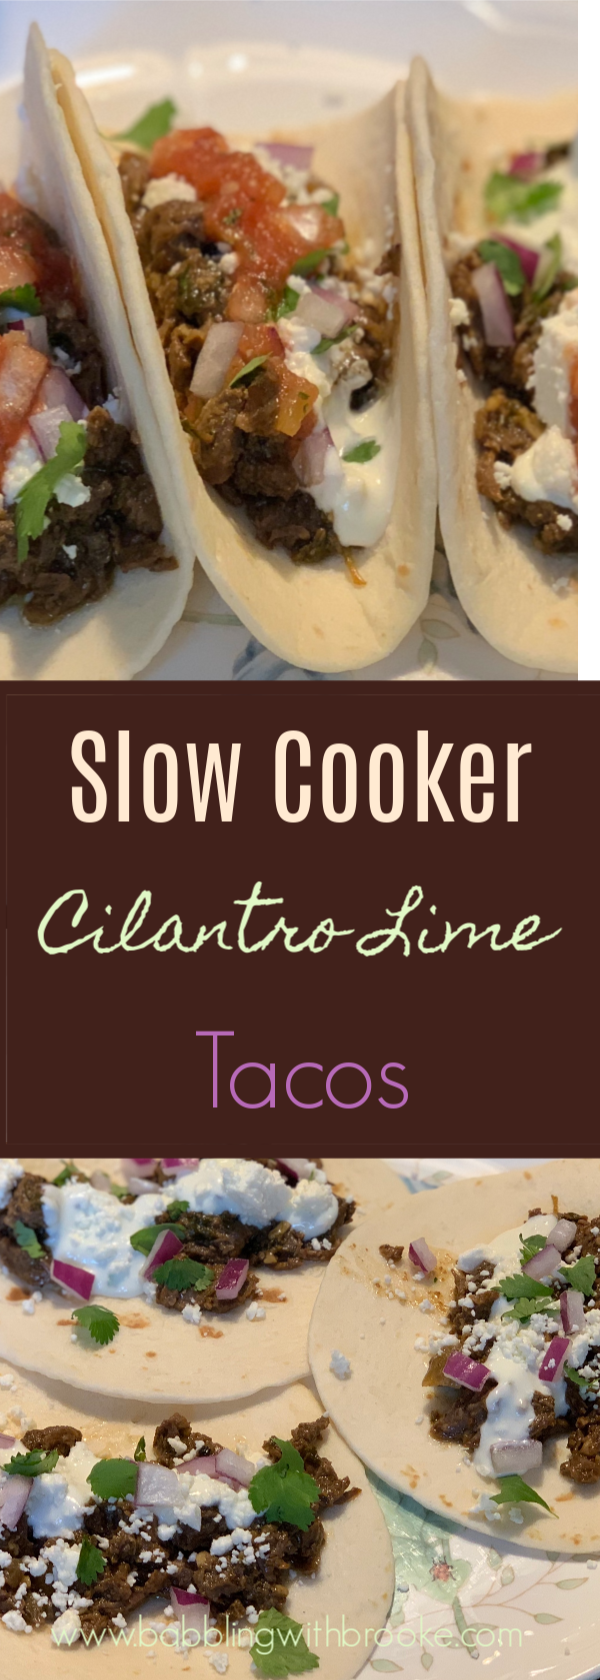 This delicious crock pot recipe is perfect for a tequila/taco Tuesday with friends! A super easy taco recipe made in the slow cooker with minimal ingredients! #easydinnerrecipe #easytacorecipe #tacorecipe #slowcookerrecipe #tacotuesdayrecipe